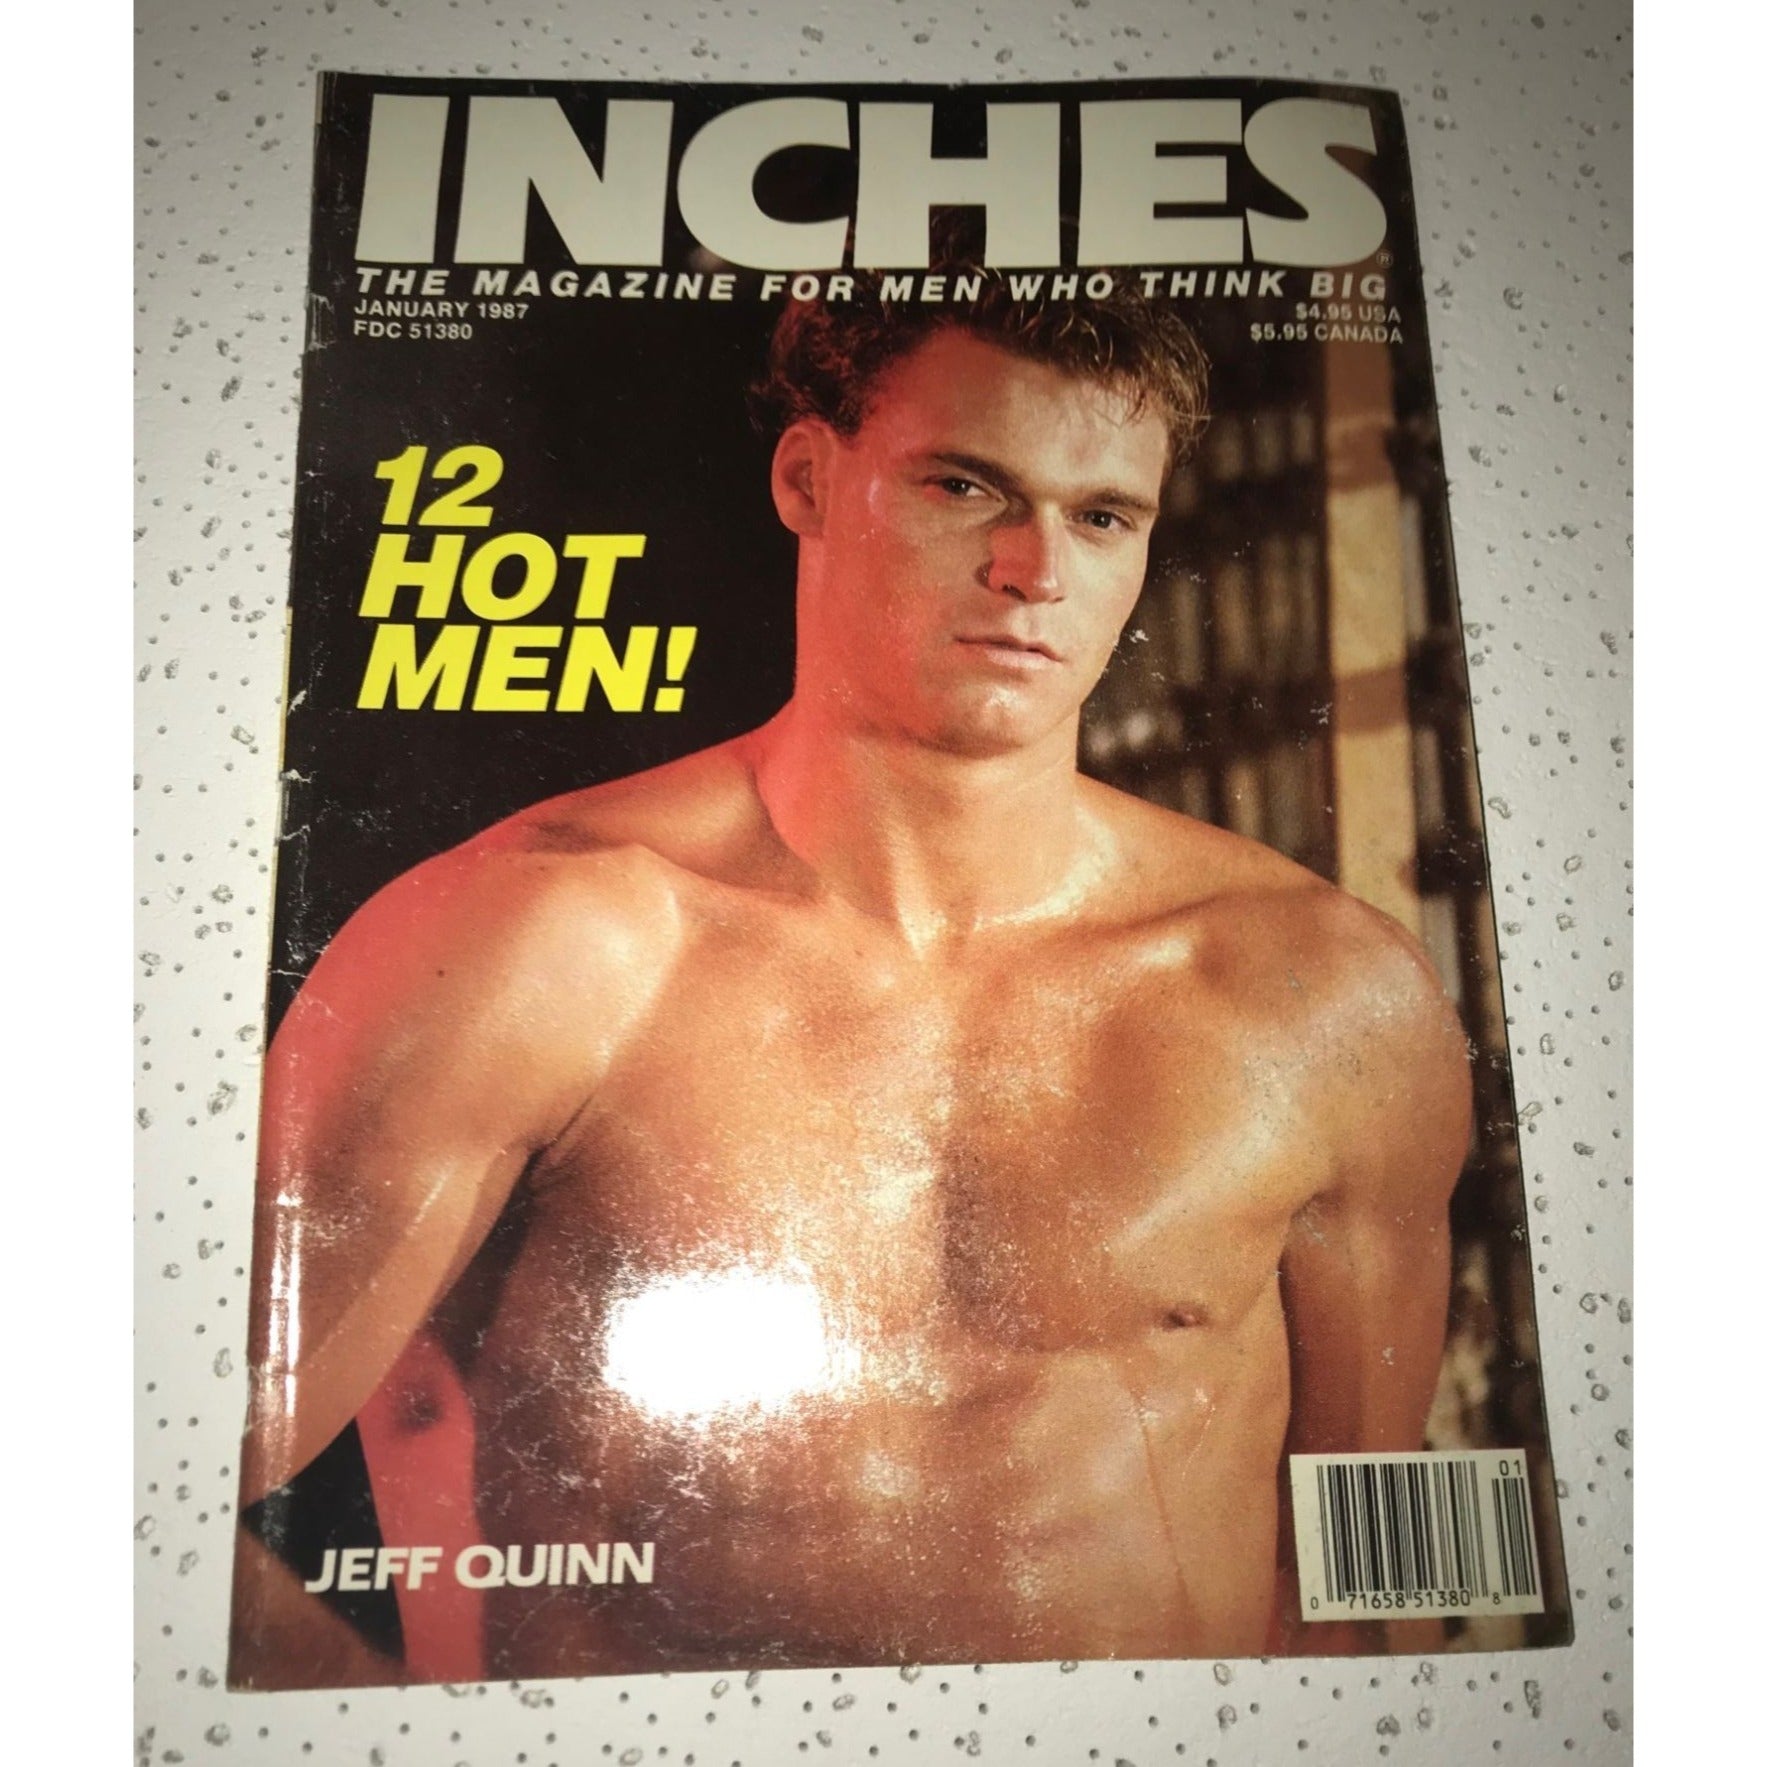 Vintage Inches Magazine Jan 1987- The Magazine For Men Who Think Big